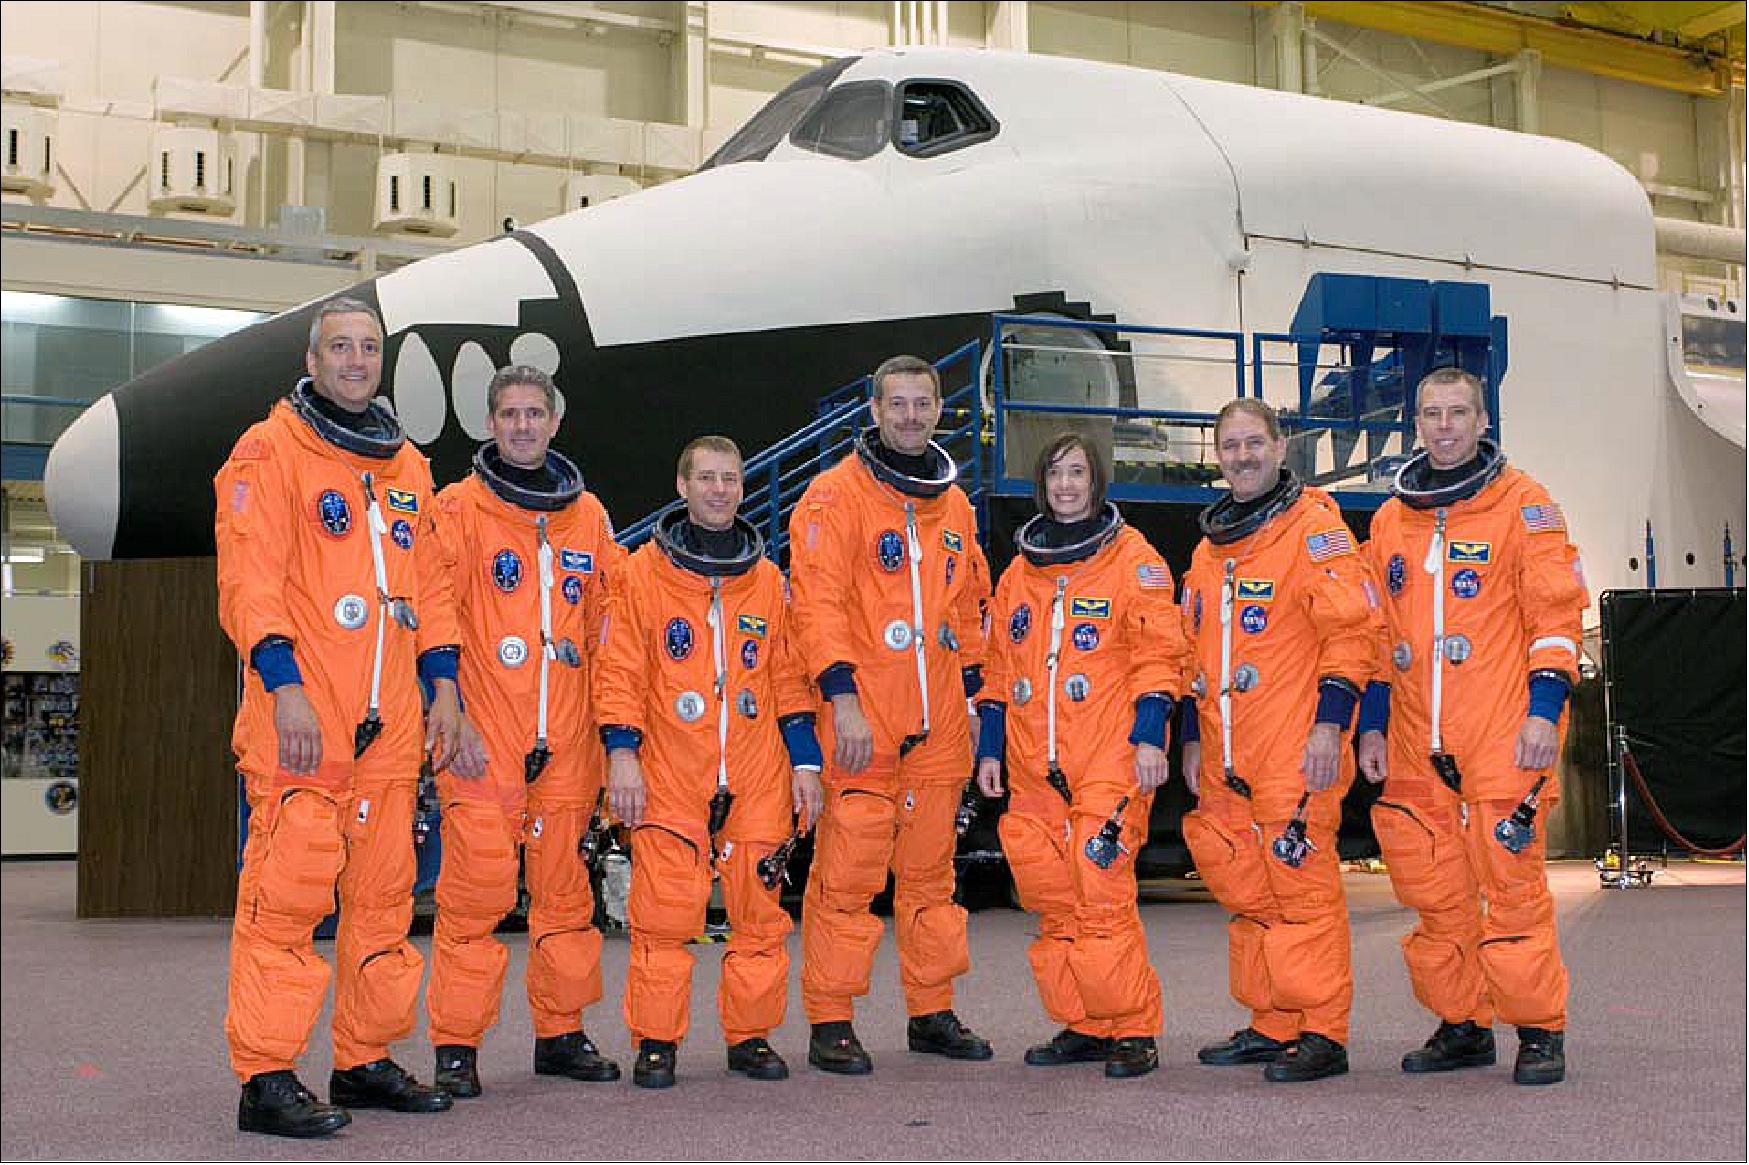 Figure 62: The STS‐125 crew members take a moment to pose for a crew photo before a training session in the Space Vehicle Mockup Facility at NASA’s Johnson Space Center. From the left are astronauts Mike Massimino, Michael Good, both mission specialists; Gregory C. Johnson, pilot; Scott Altman, commander; Megan McArthur, John Grunsfeld and Andrew Feustel, all mission specialists (image credit: NASA)